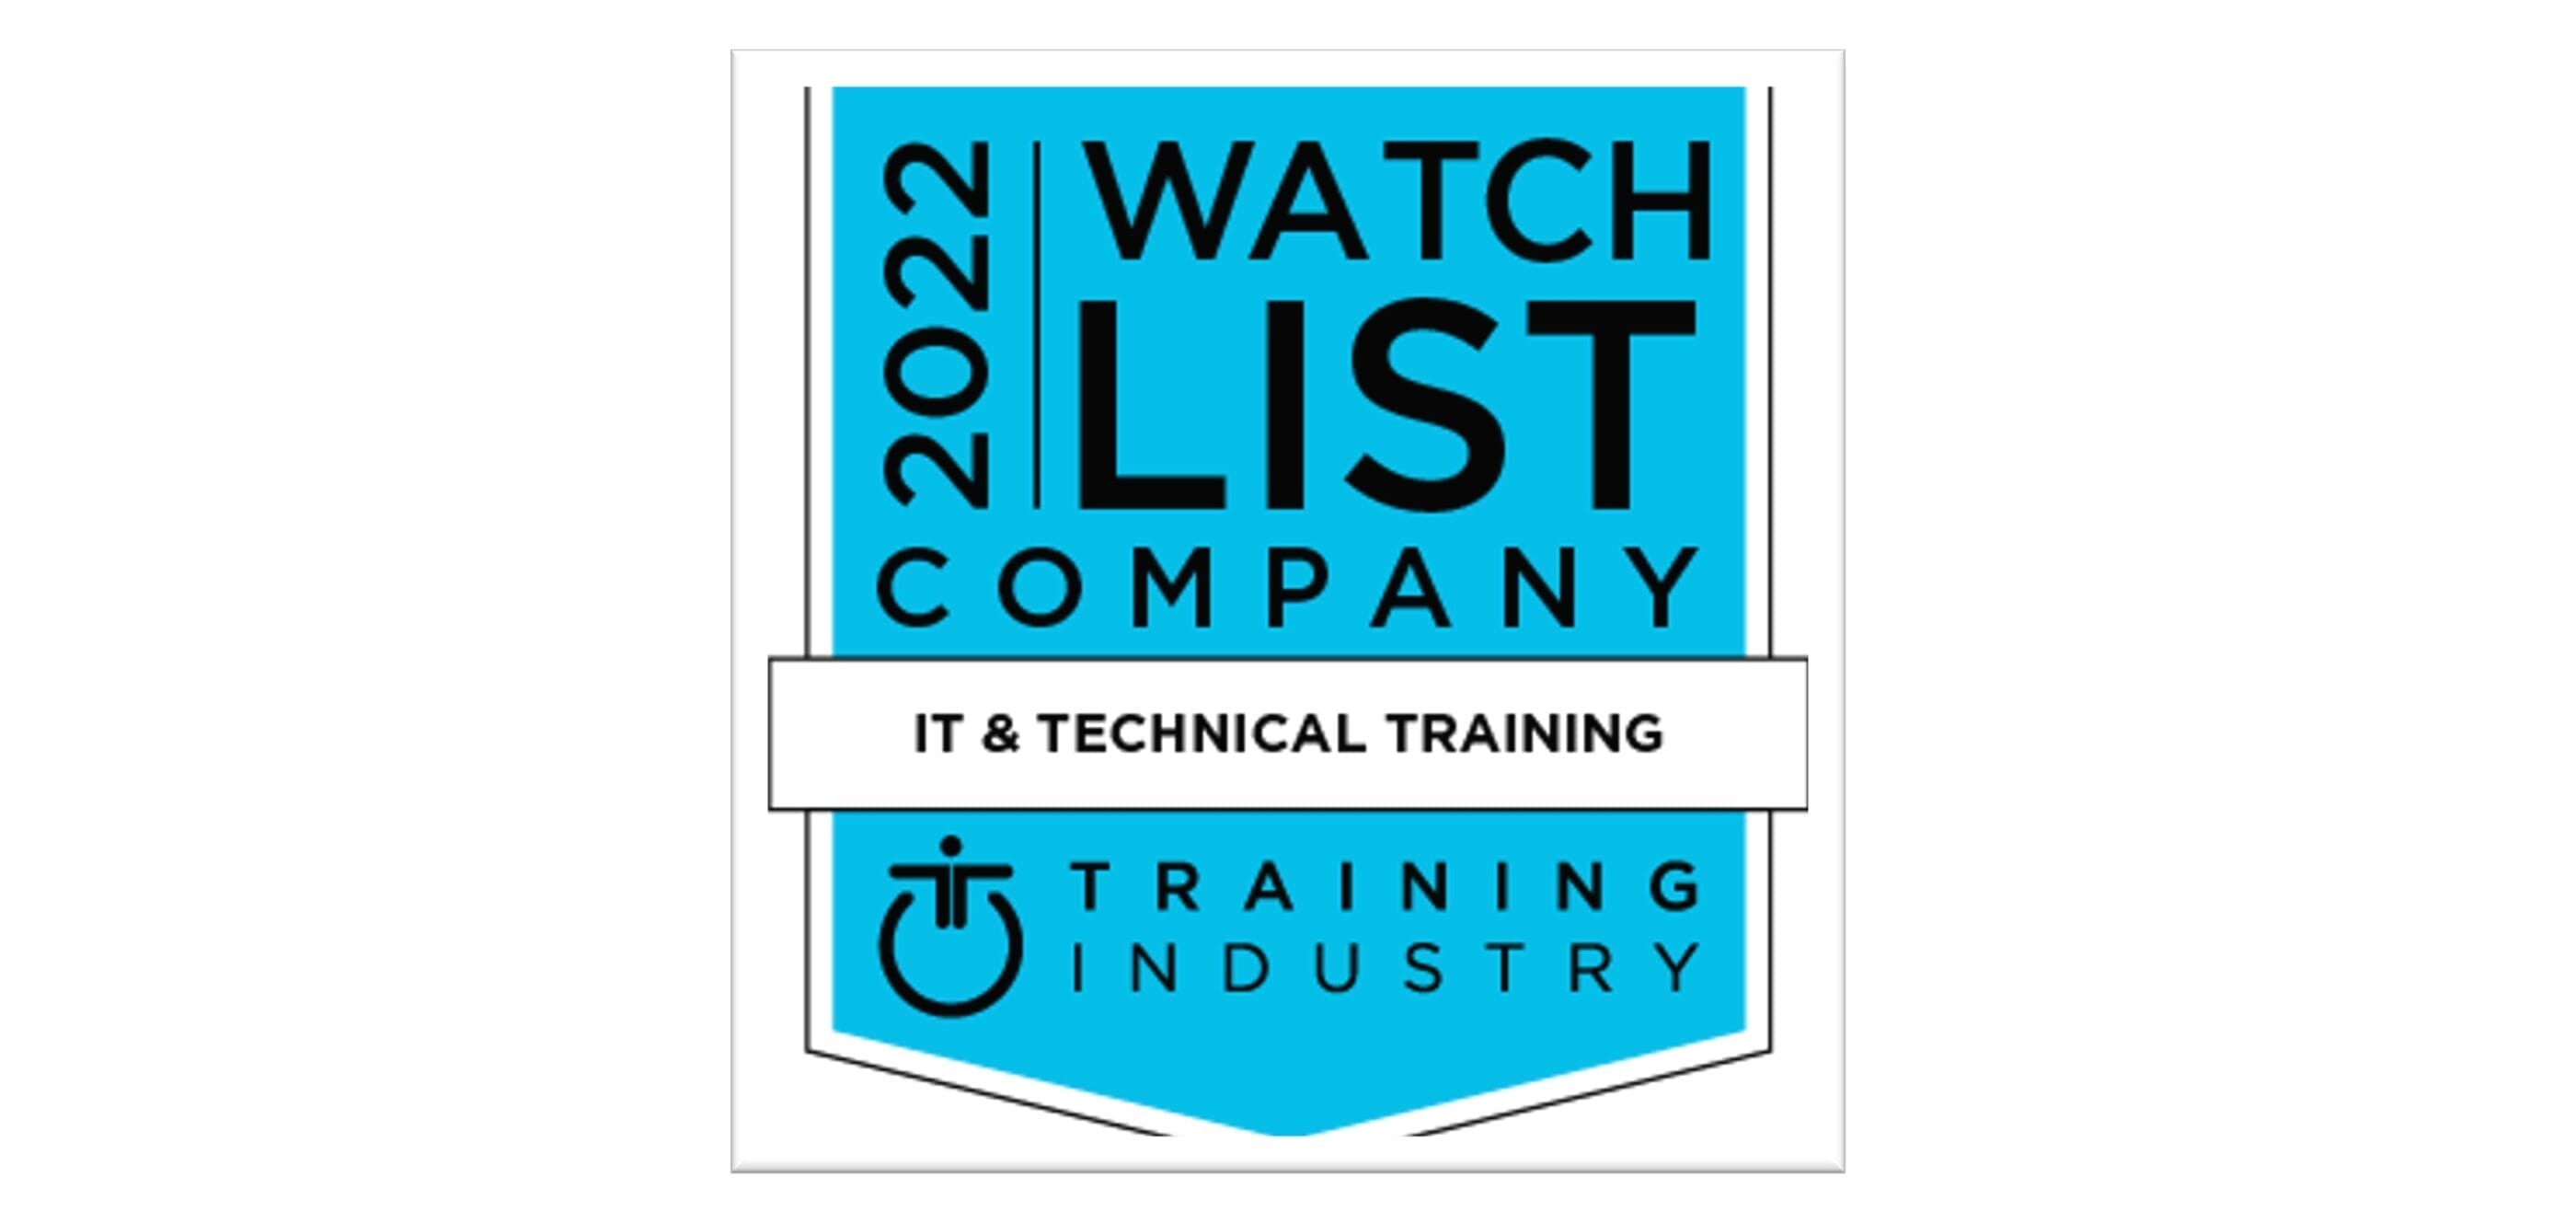 Training Industry's 2022 Watch List for IT & Technical Training | Xebia Academy